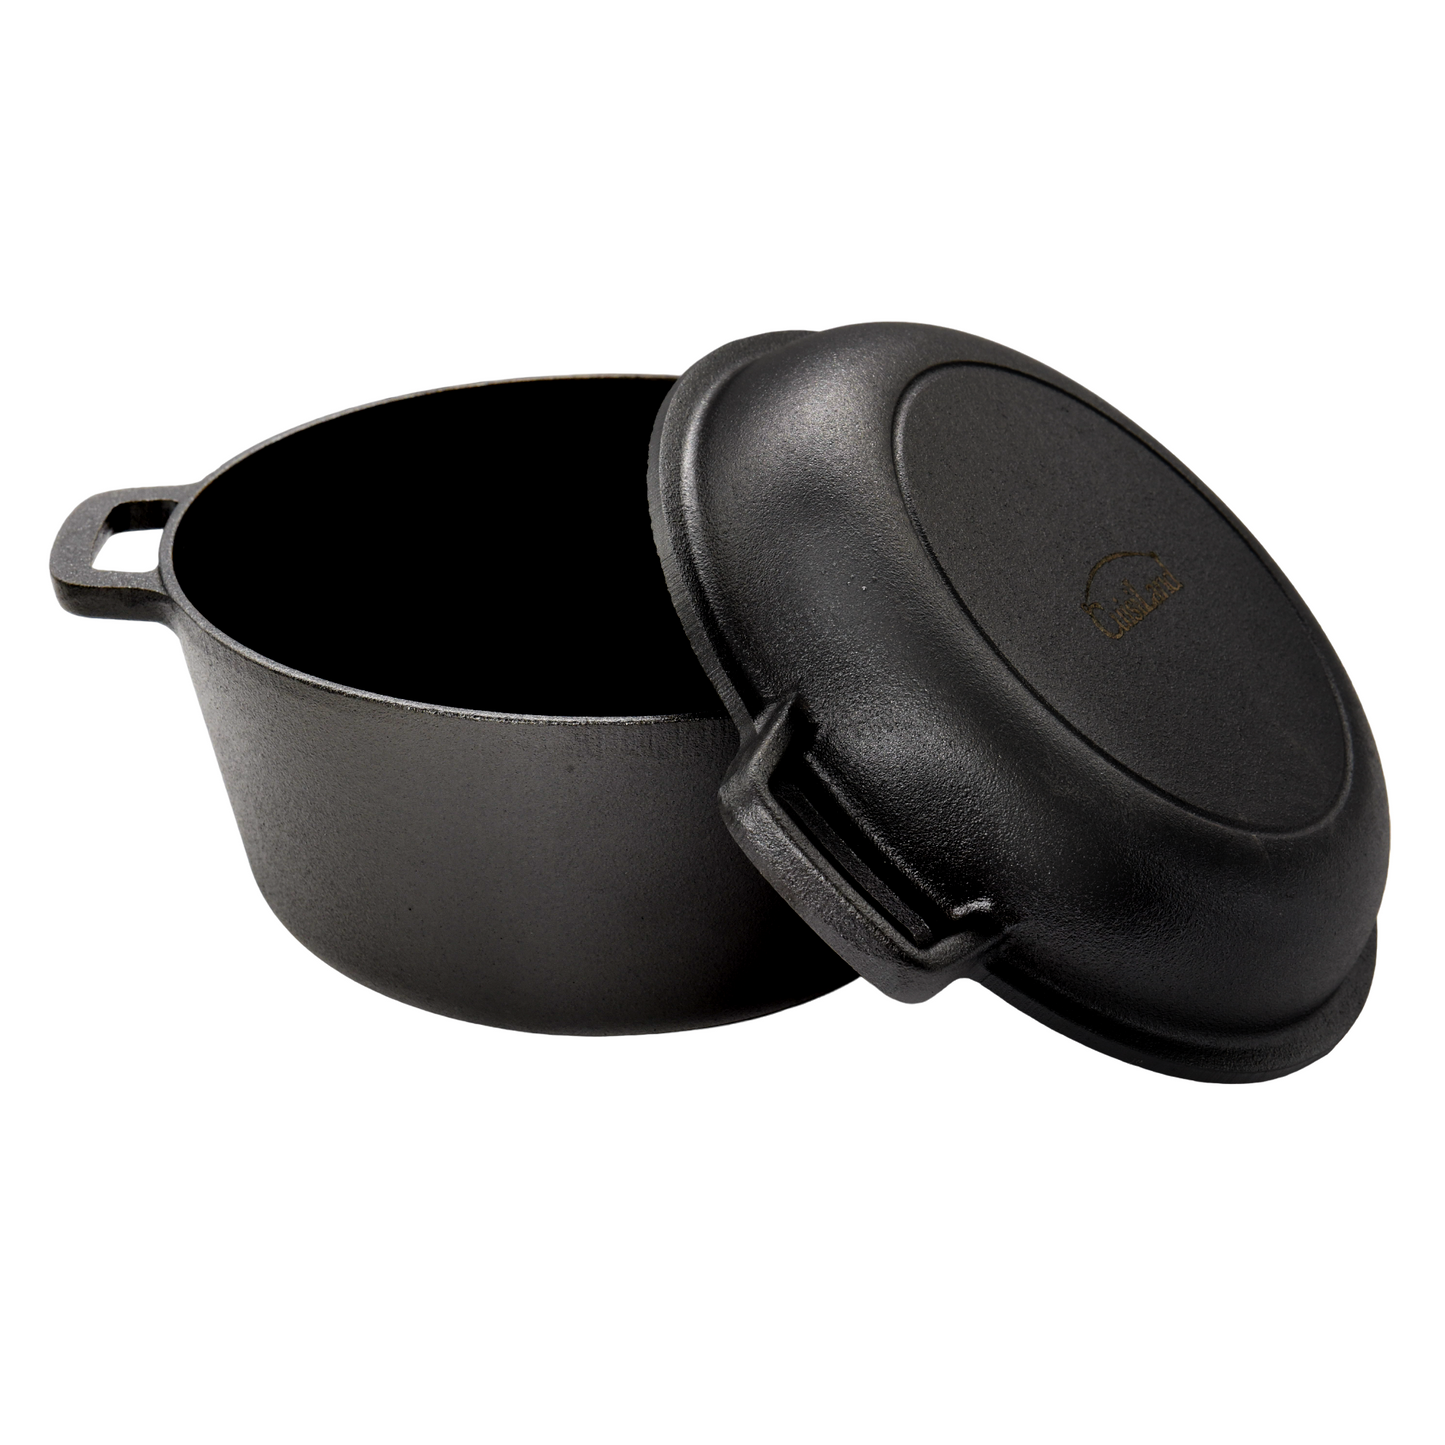 Pre-Seasoned Combo Cooker 5QT Dutch Oven With 10.25" Skillet Lid